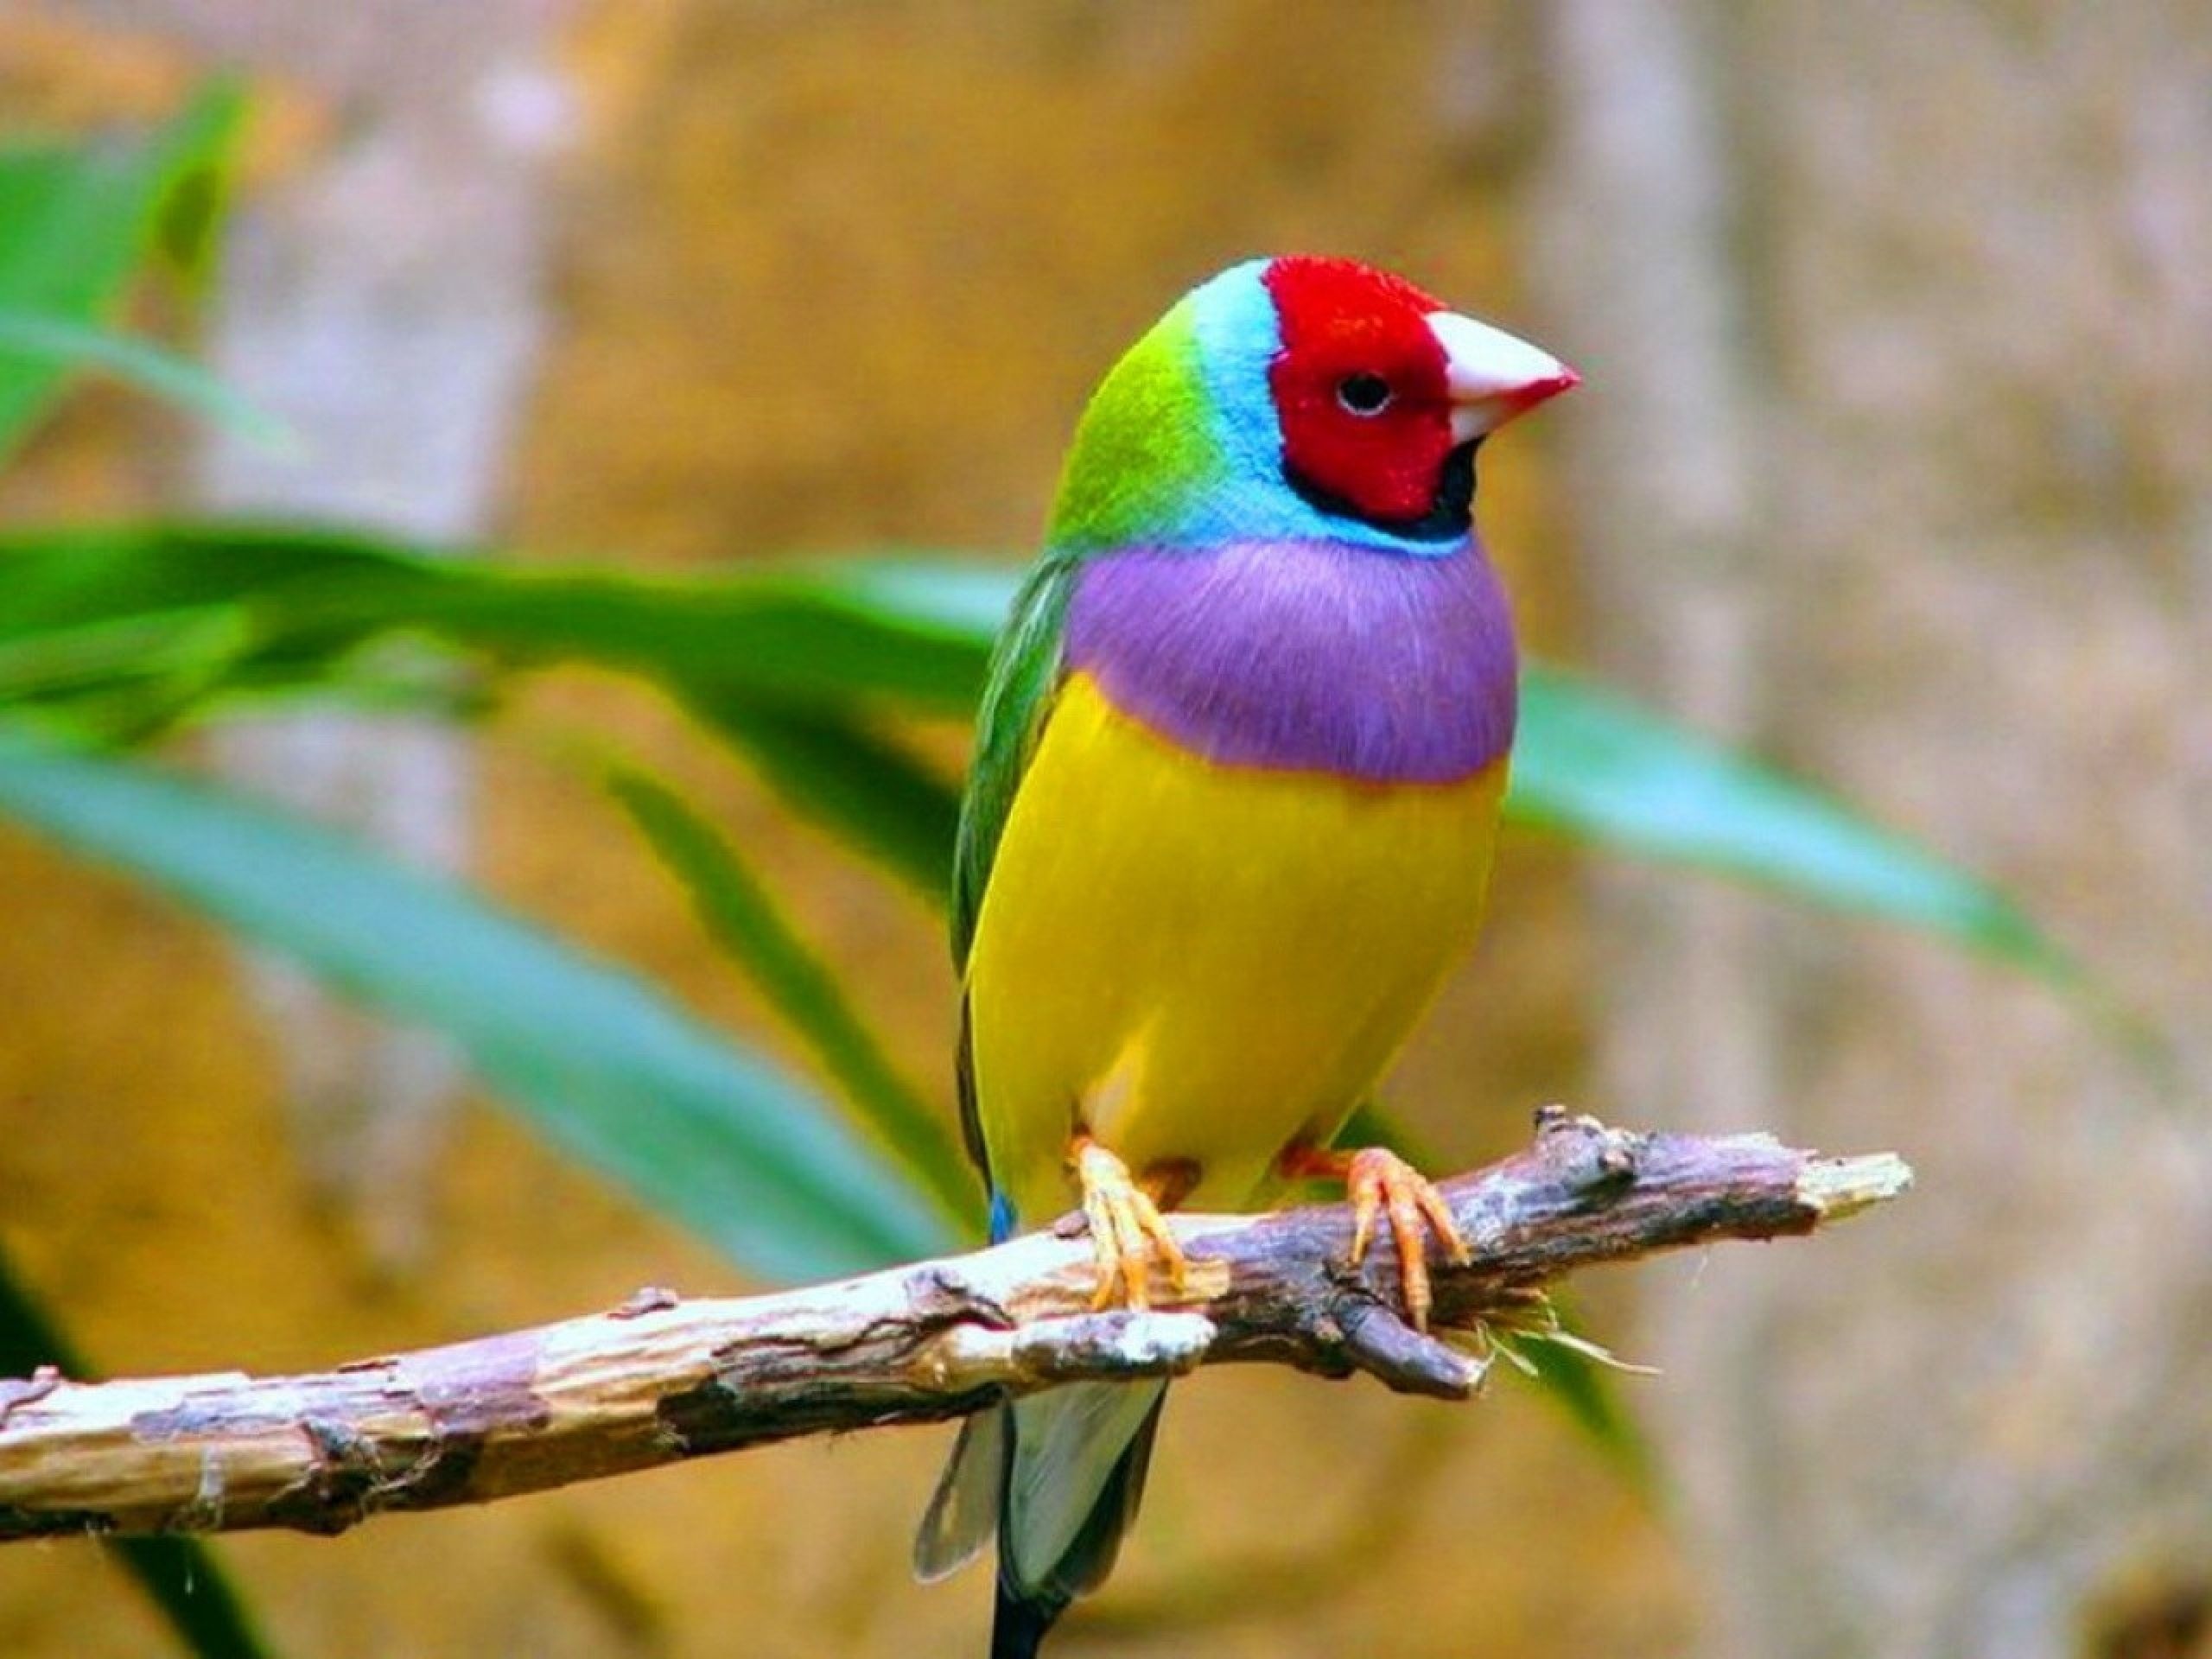 cute colorful bird | Skittles | Pinterest | Bird, Colorful birds and ...